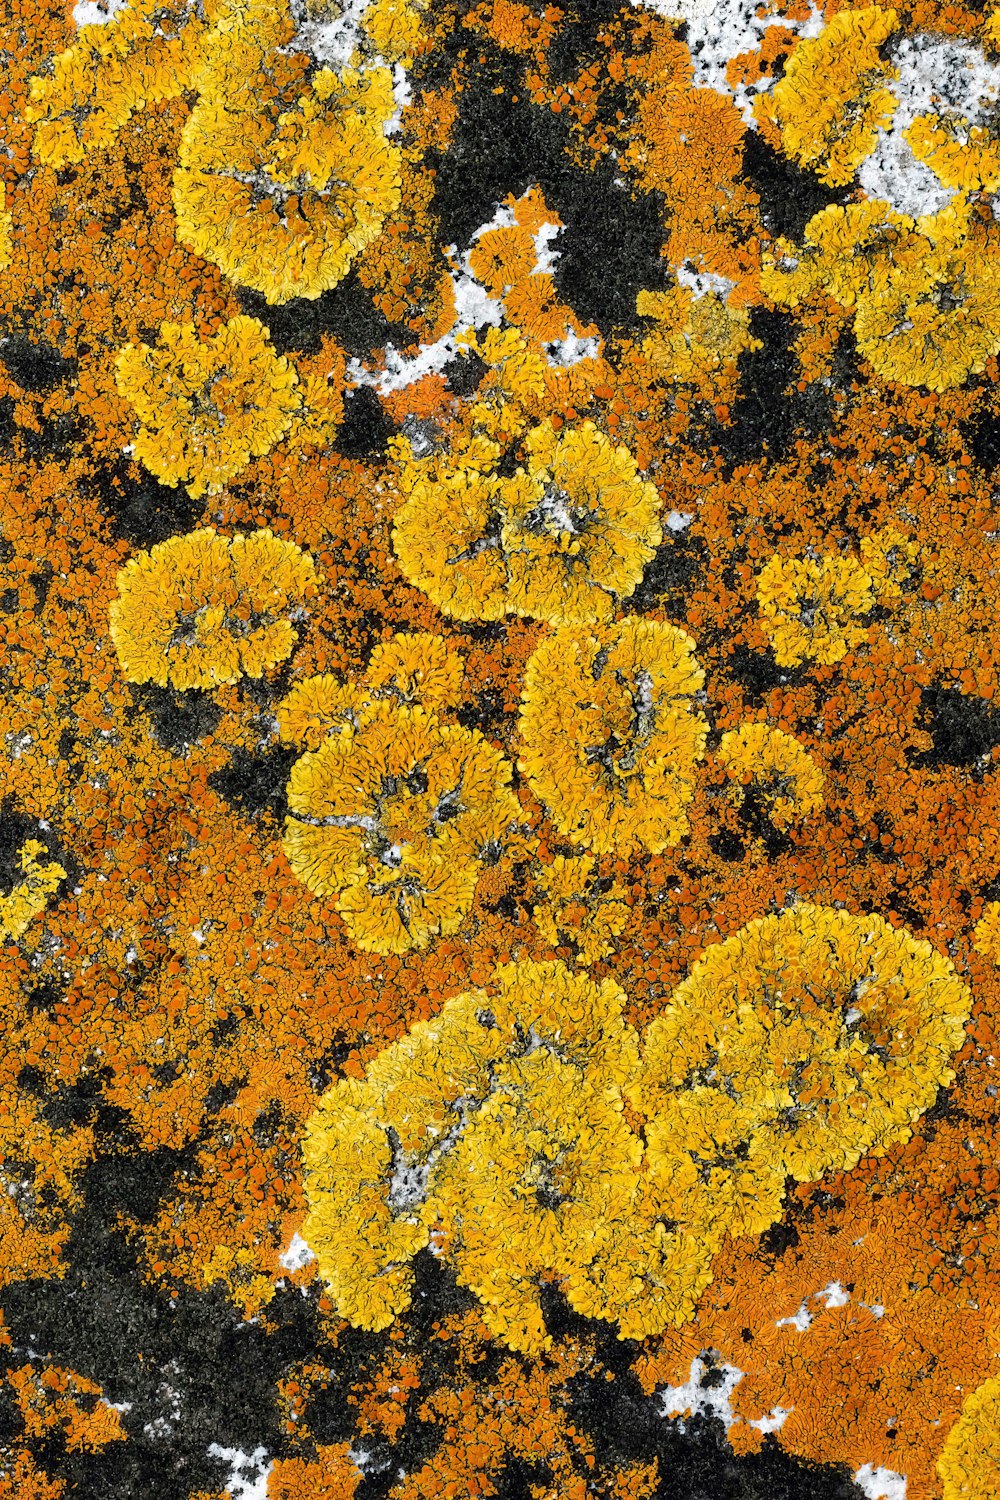 a bunch of yellow flowers that are on a rock